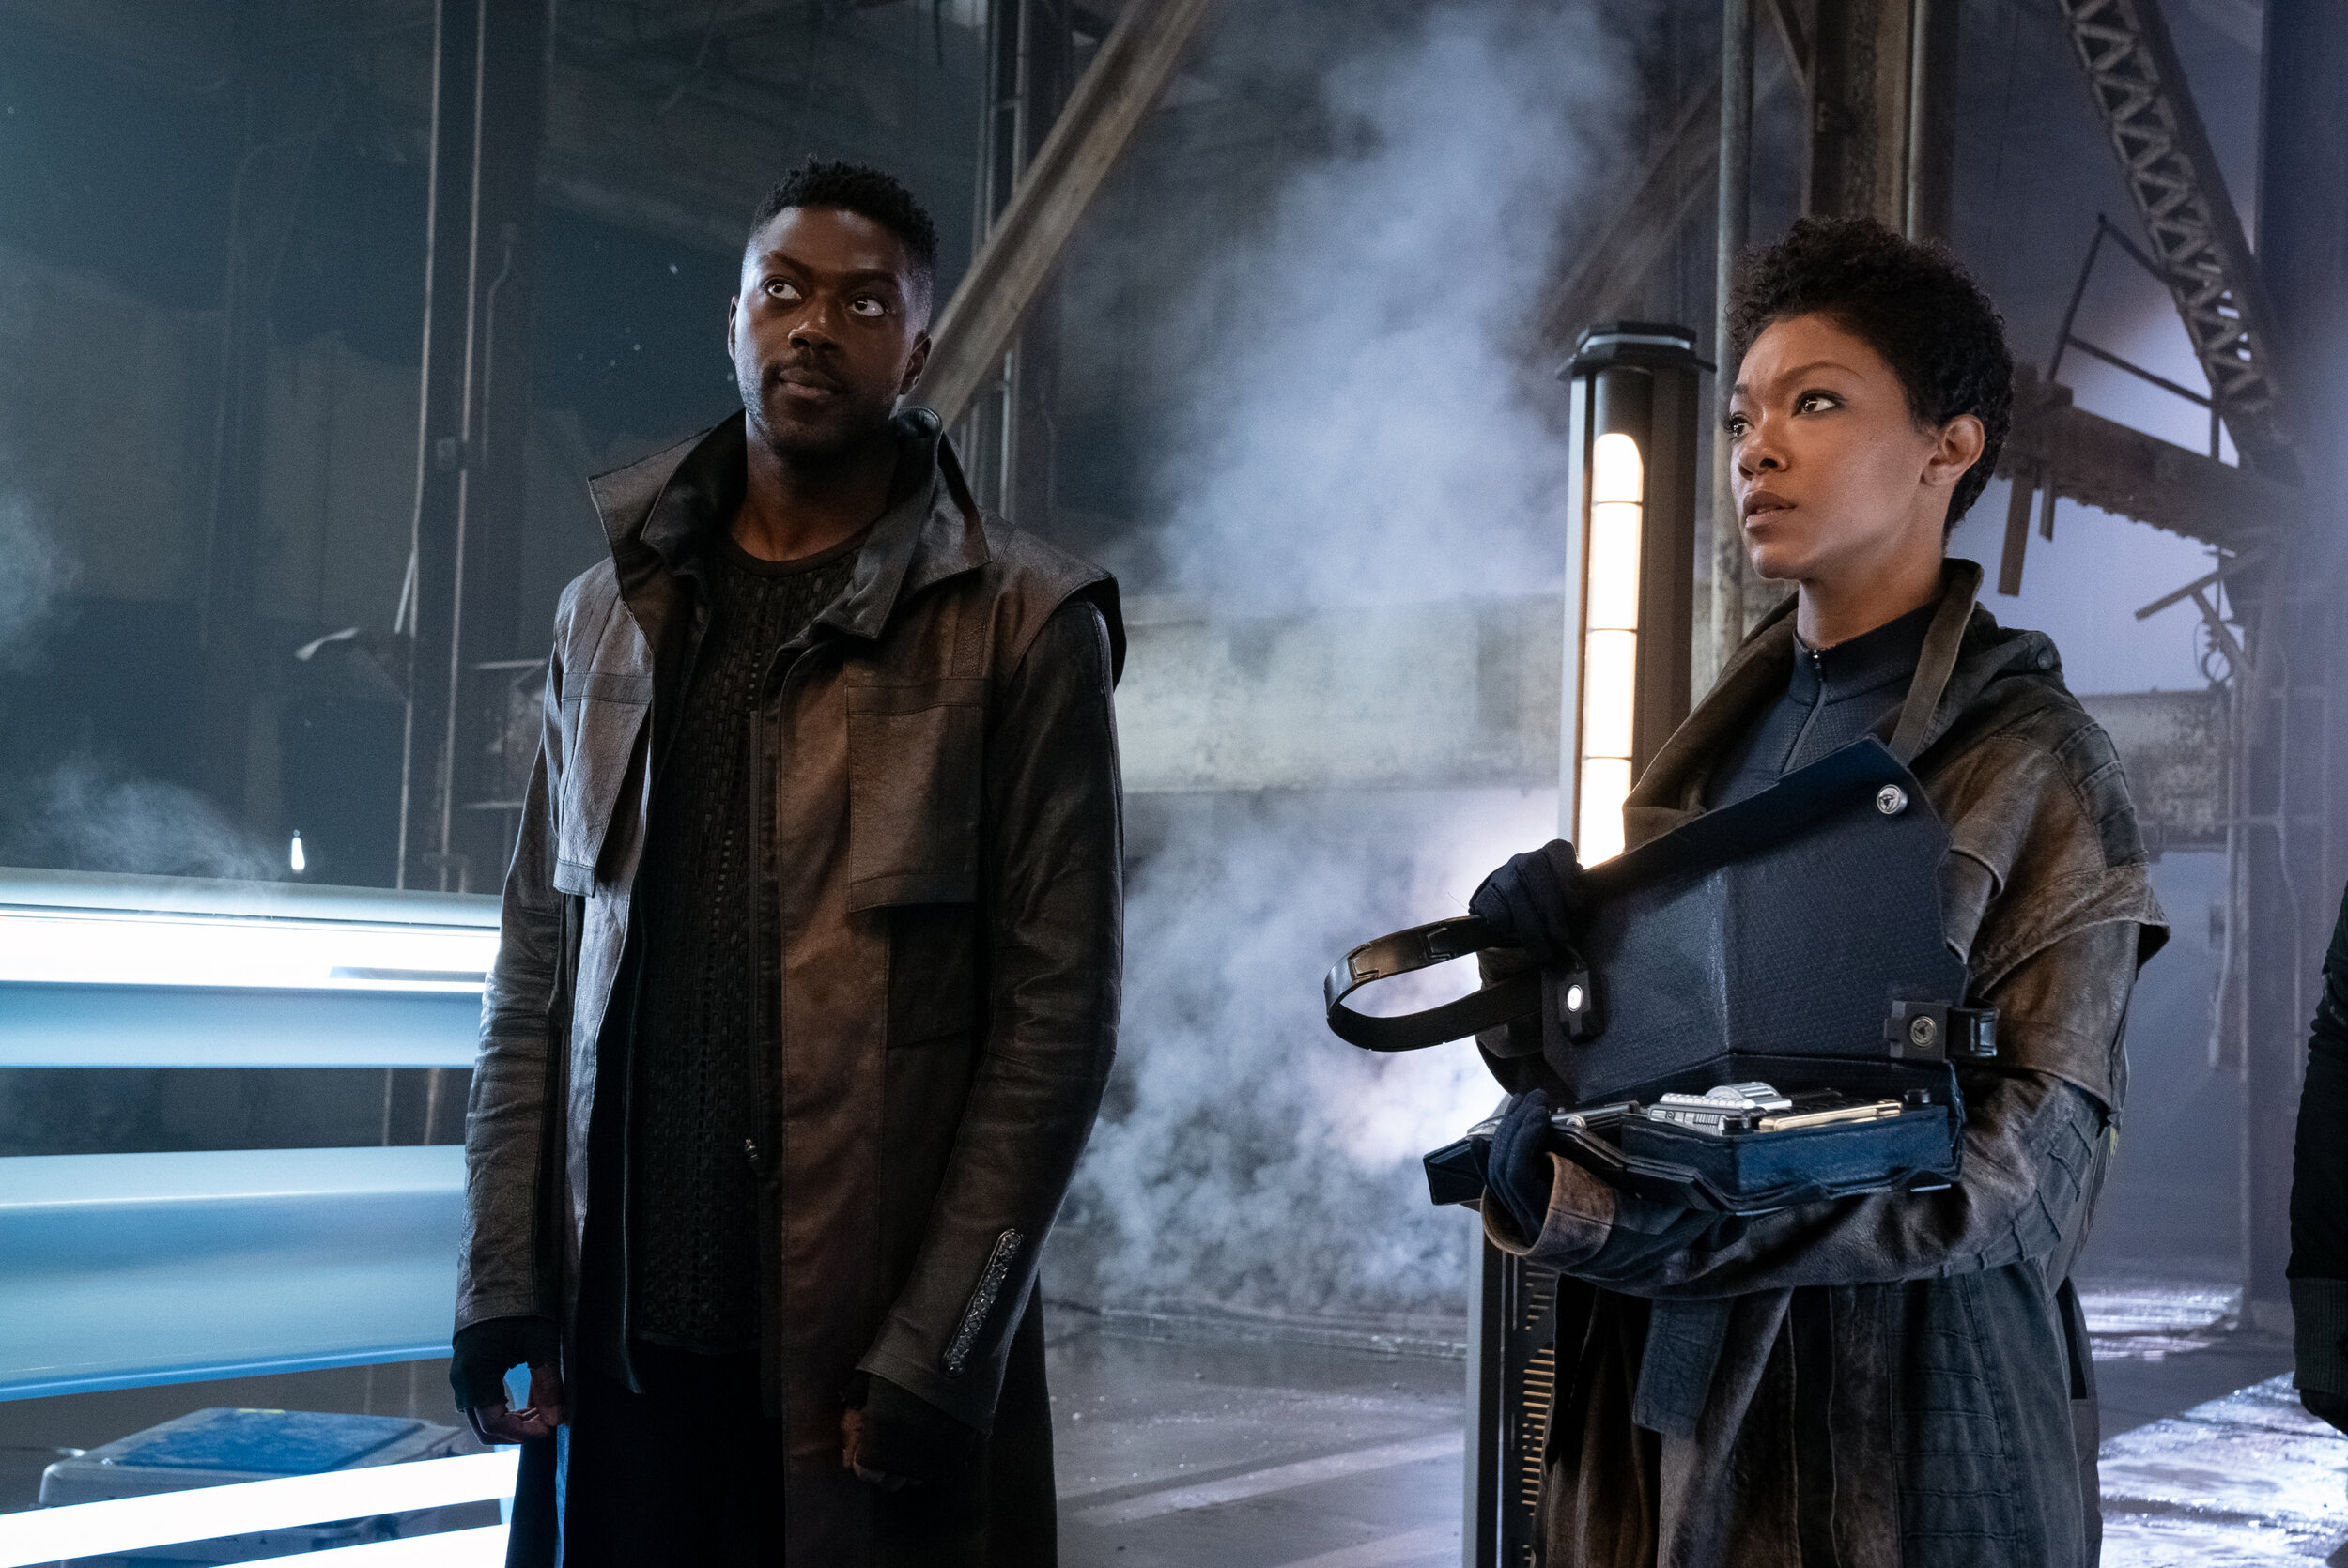  Pictured (L-R): David Ajala as Book and Sonequa Martin-Green as Burnham; of the CBS All Access series STAR TREK: DISCOVERY. Photo Cr: Michael Gibson/CBS ©2020 CBS Interactive, Inc. All Rights Reserved. 